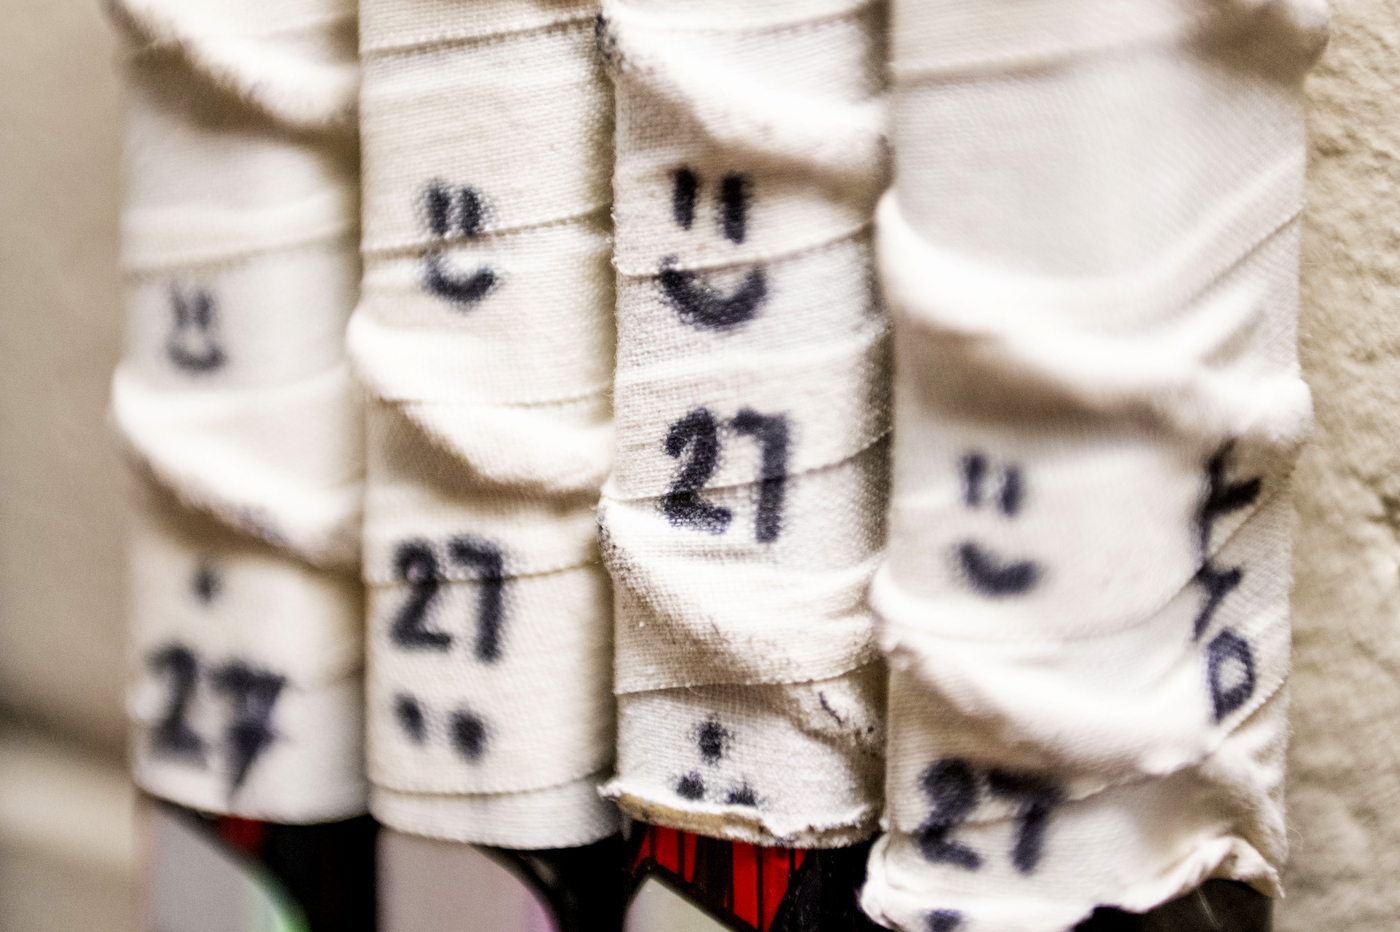 Happy faces and the number 27 are written in marker on the tape wrapped around 4 hockey sticks 